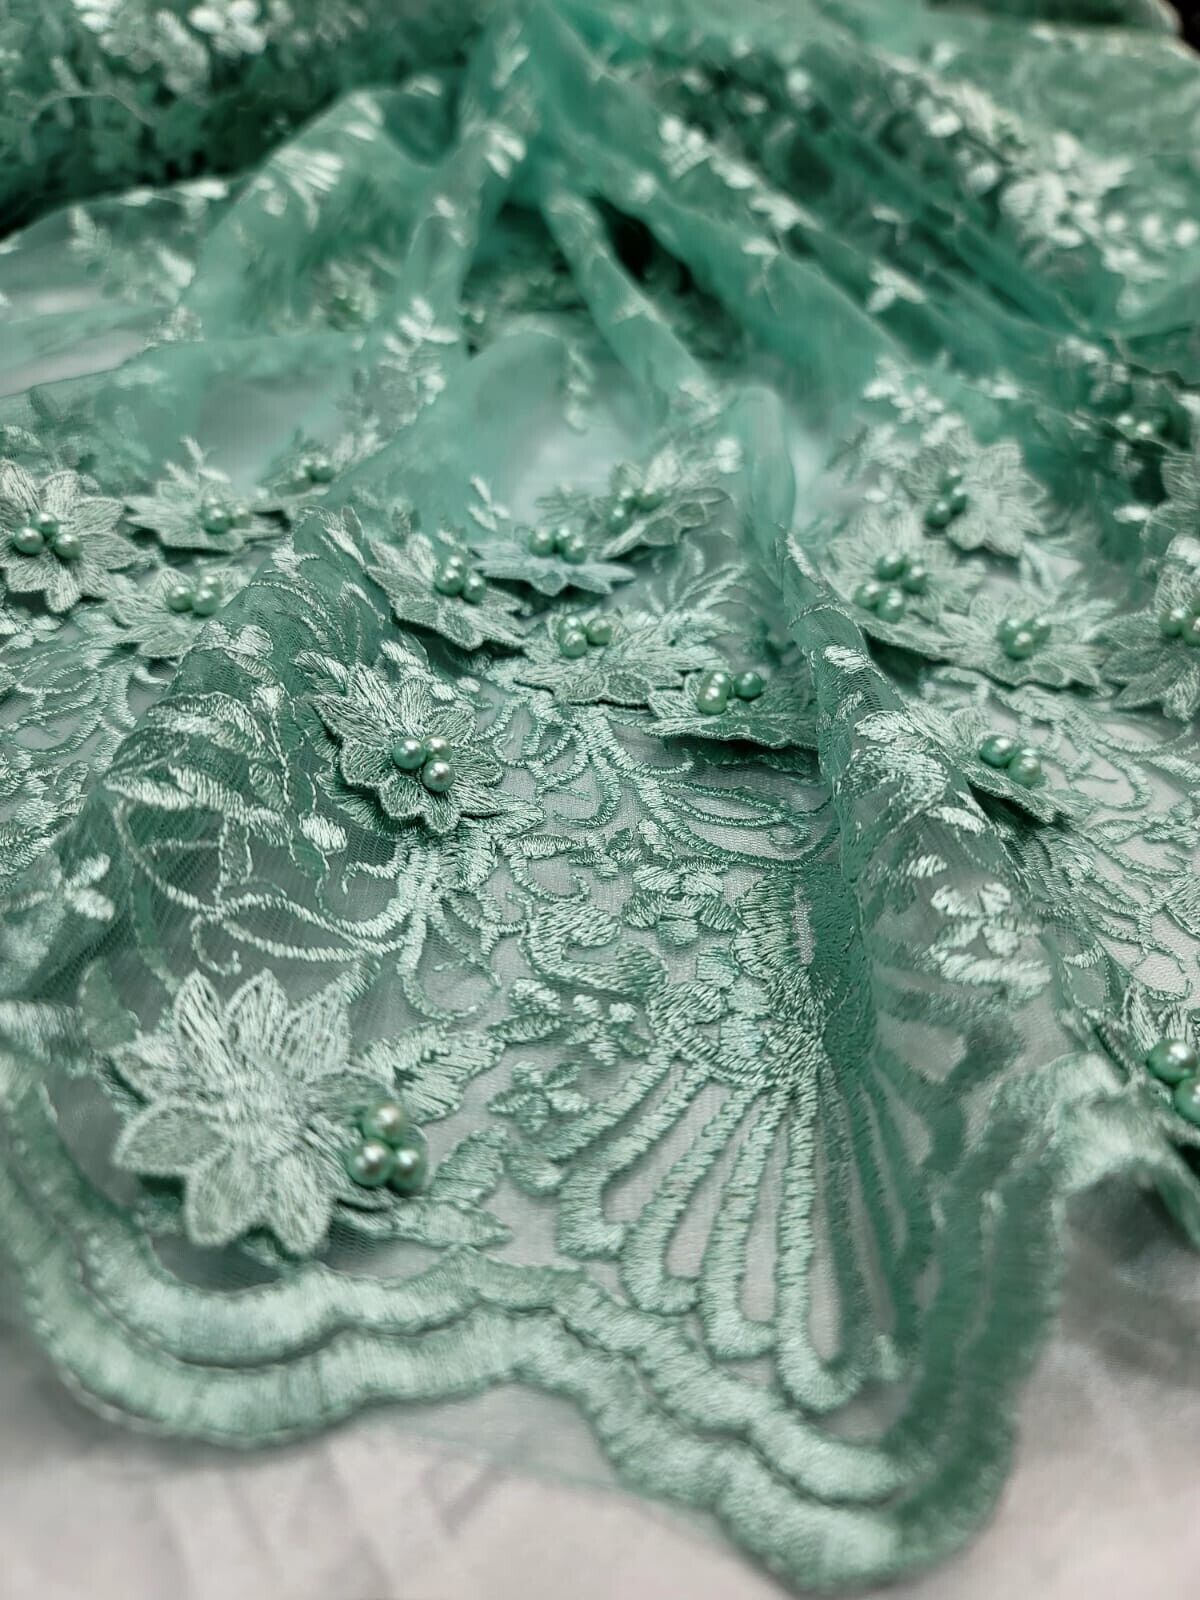 Sage green 3d Floral Embroidery Pearls Mesh Lace Scalloped Fabric By yard 54" w